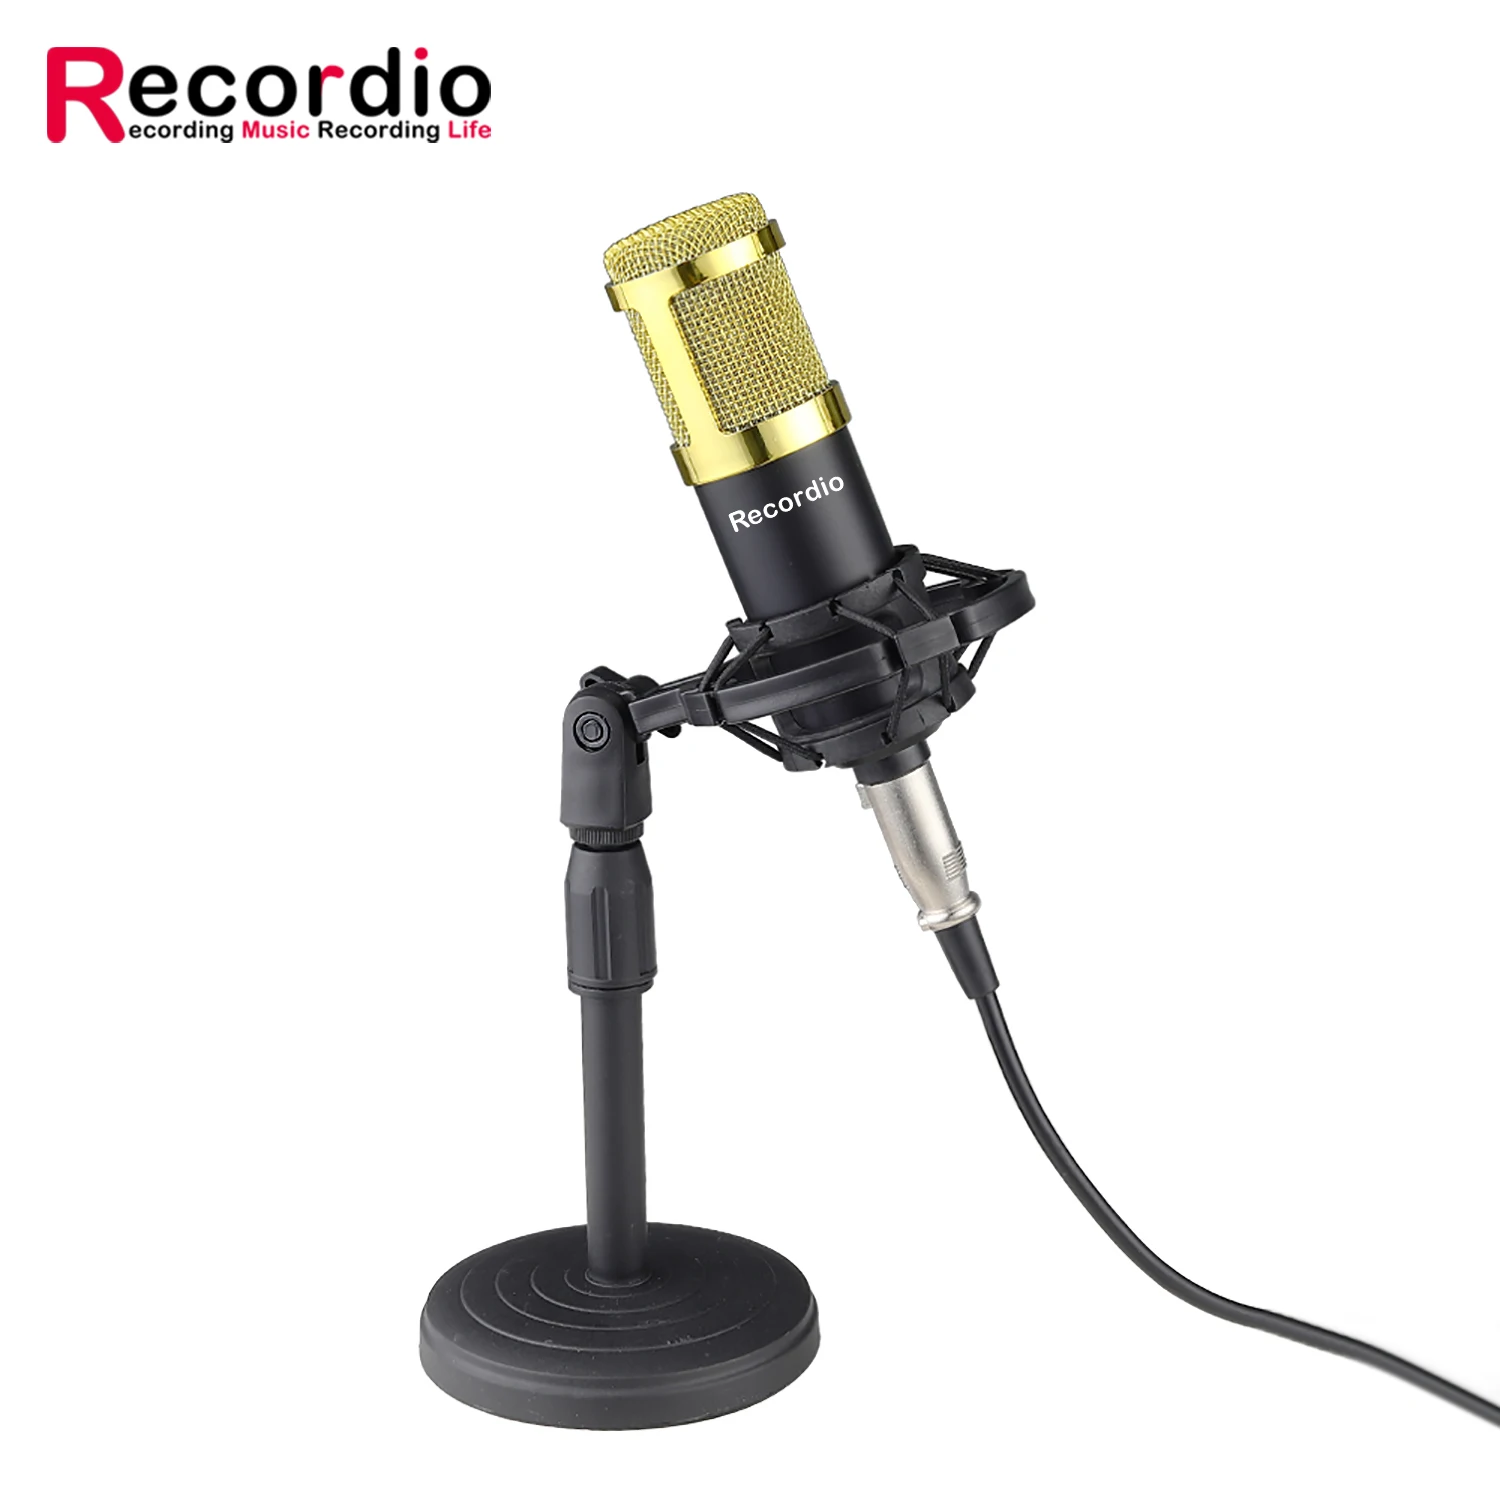 

GAM-700PS 3.5MM Professional Cheaper Plastic Condenser Microphone For Computer Recording Studio Game Singing Live Broadcast, Black,gold